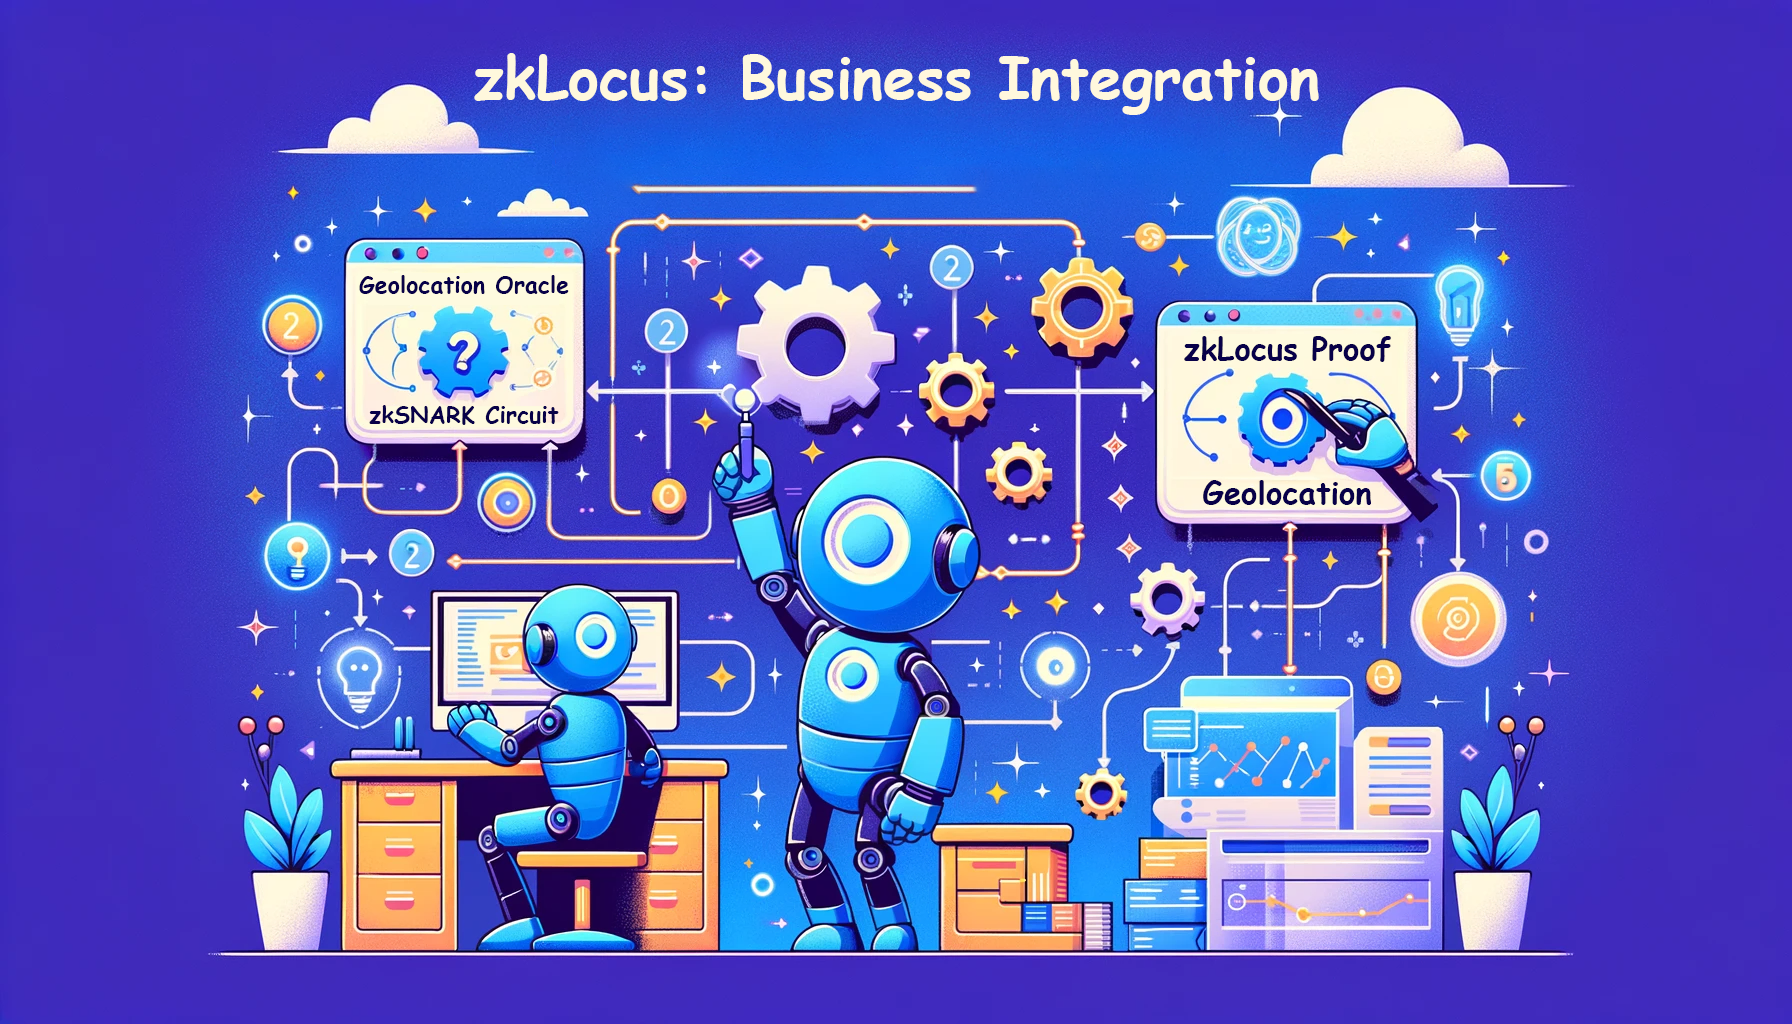 How to integrate zkLocus into your business or application